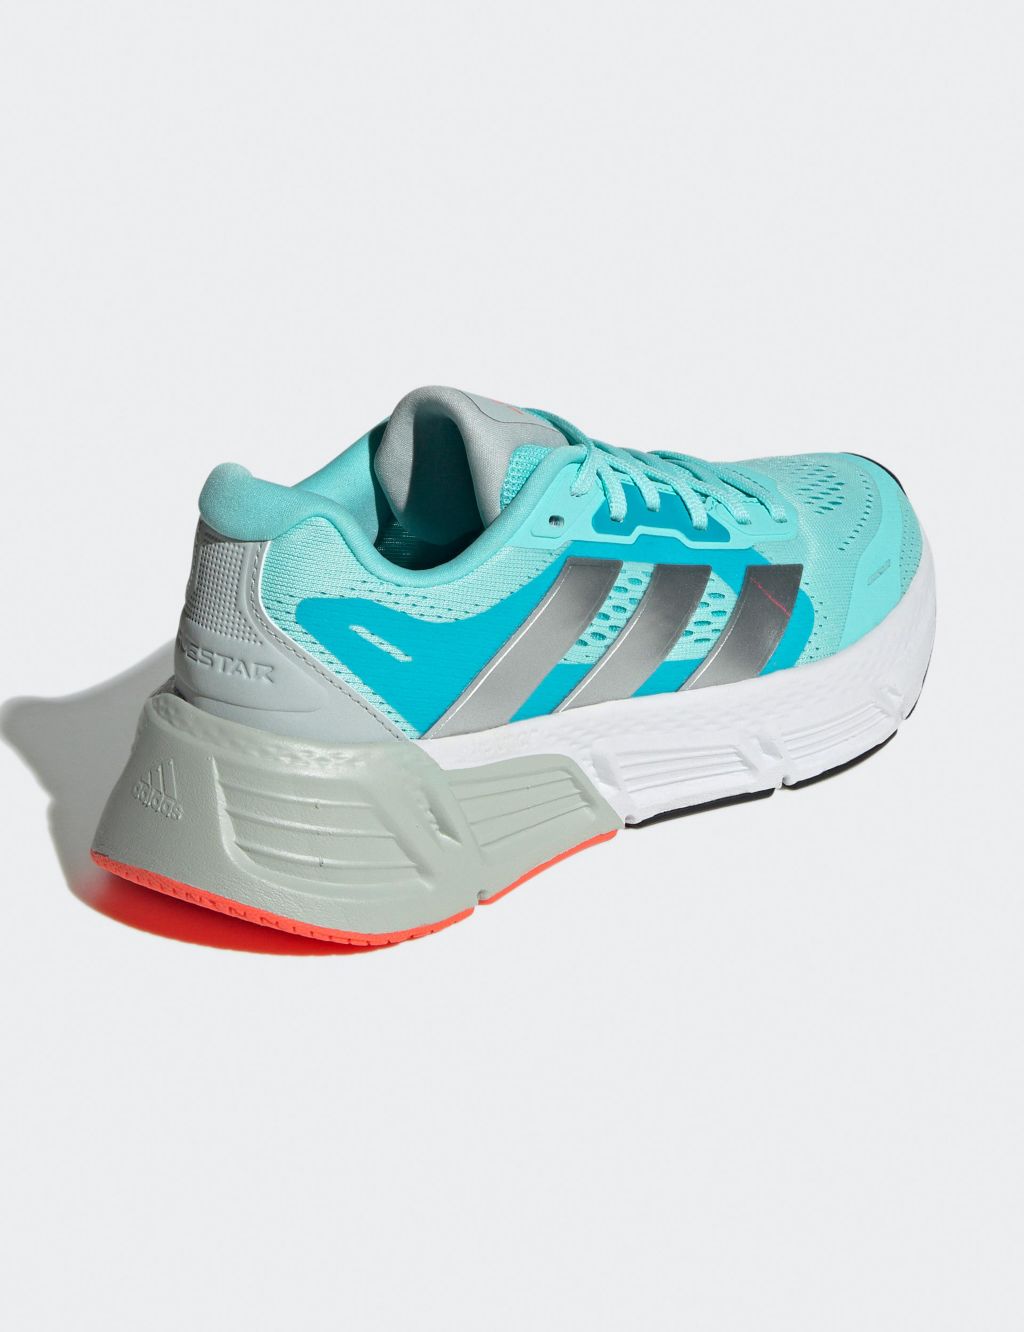 Questar 2 Bounce Running Trainers image 3